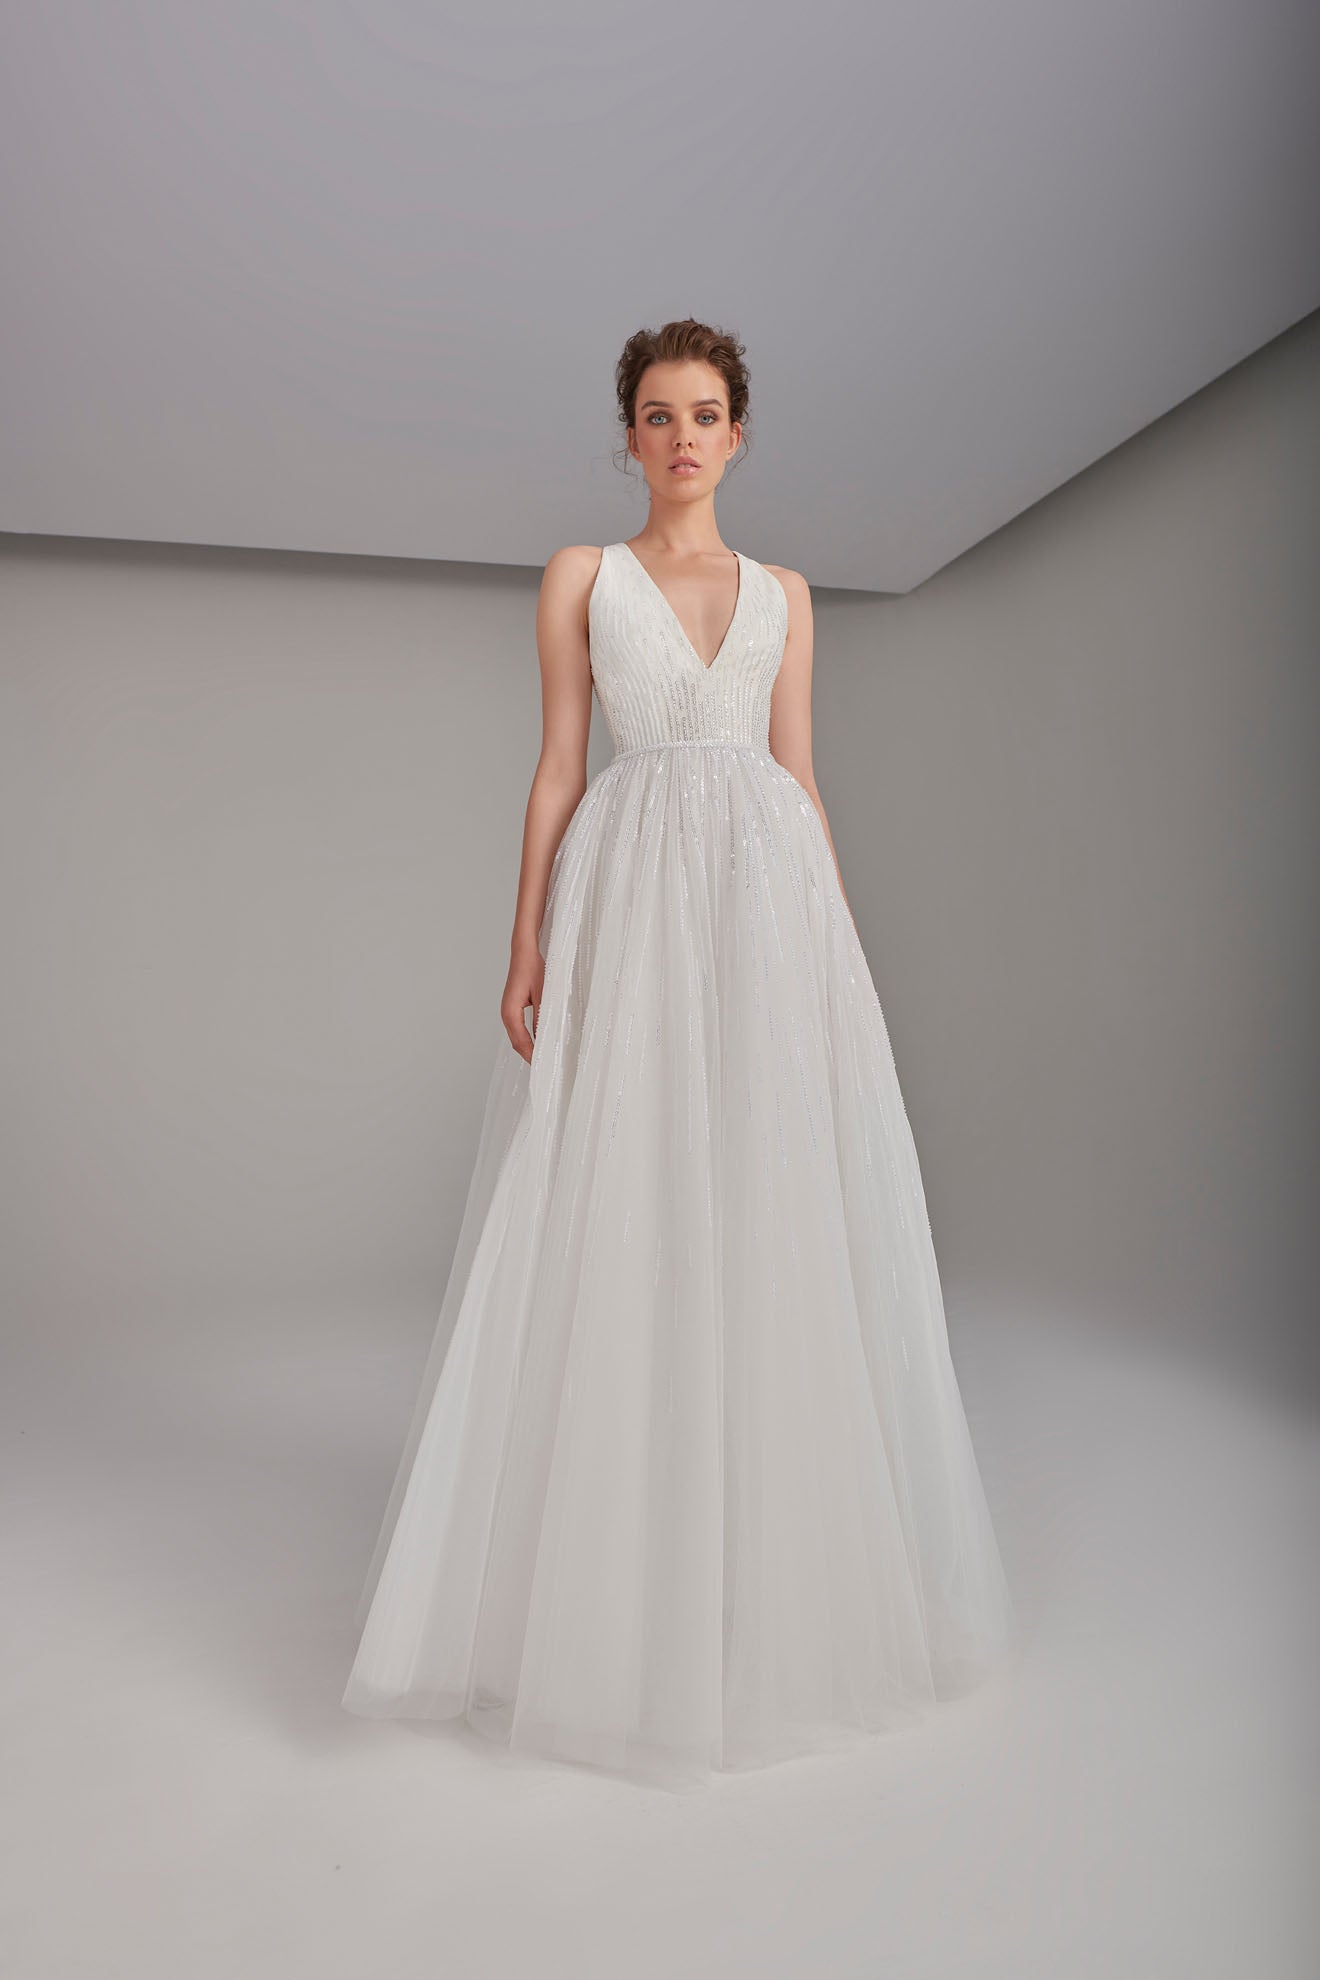 Luxury V-neckline tulle wedding gown with shimmery beads